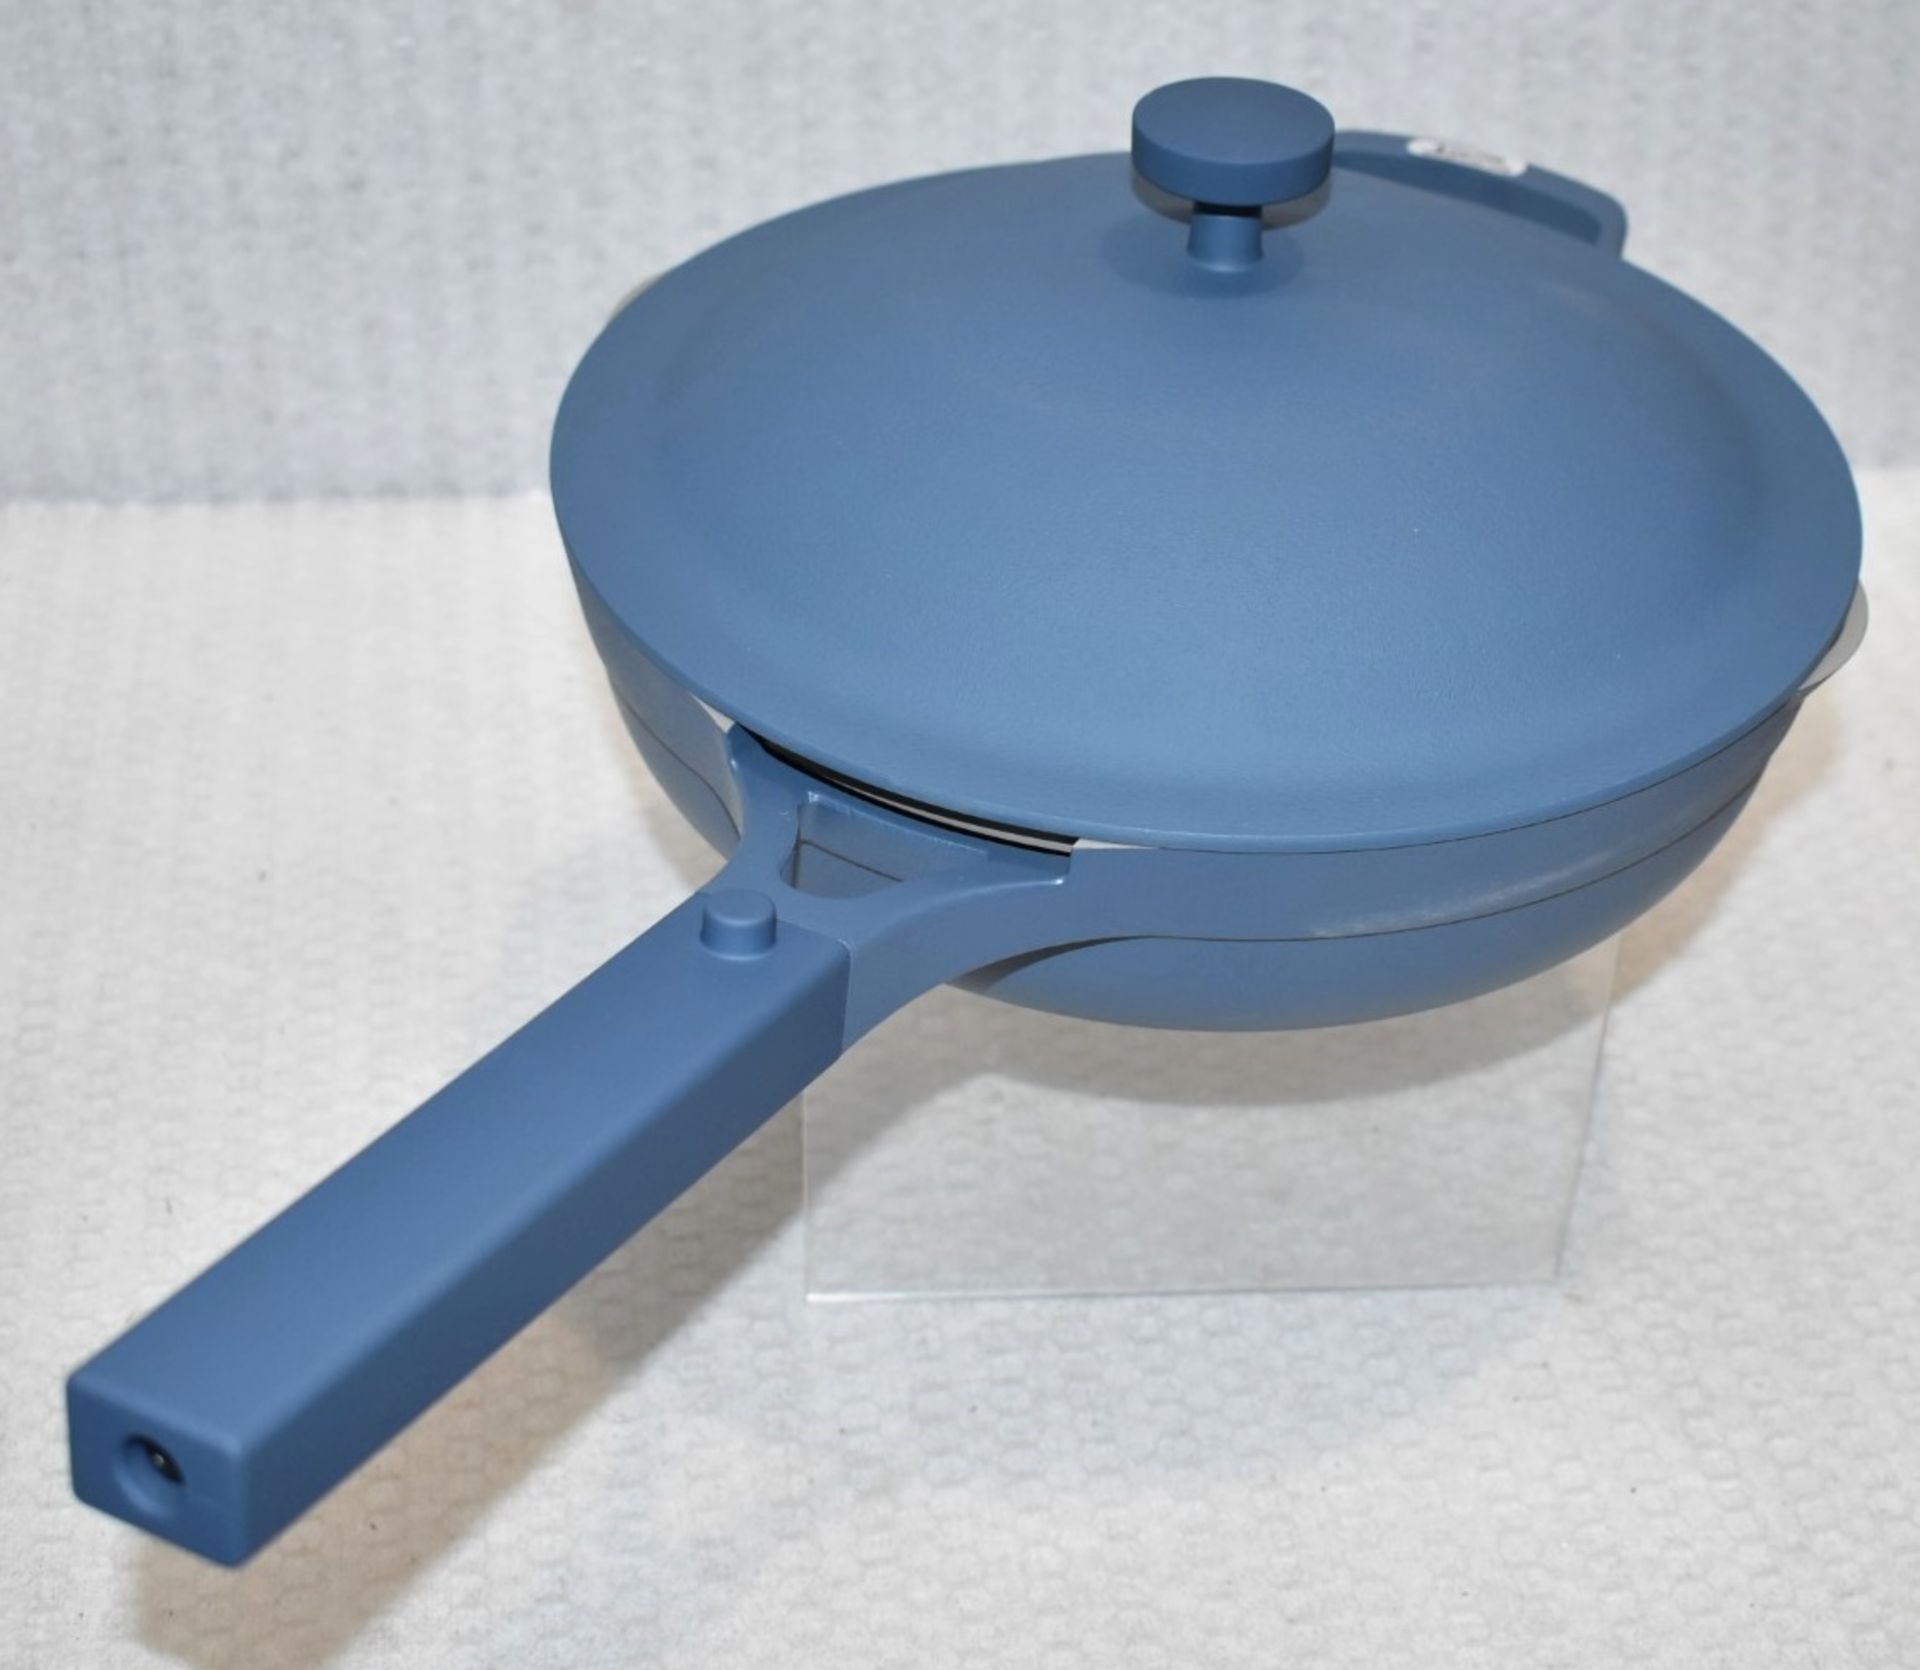 1 x OUR PLACE Always Pan Set with Steel Steamer, in Blue (26.5cm) - Original Price £155.00 - Image 4 of 14